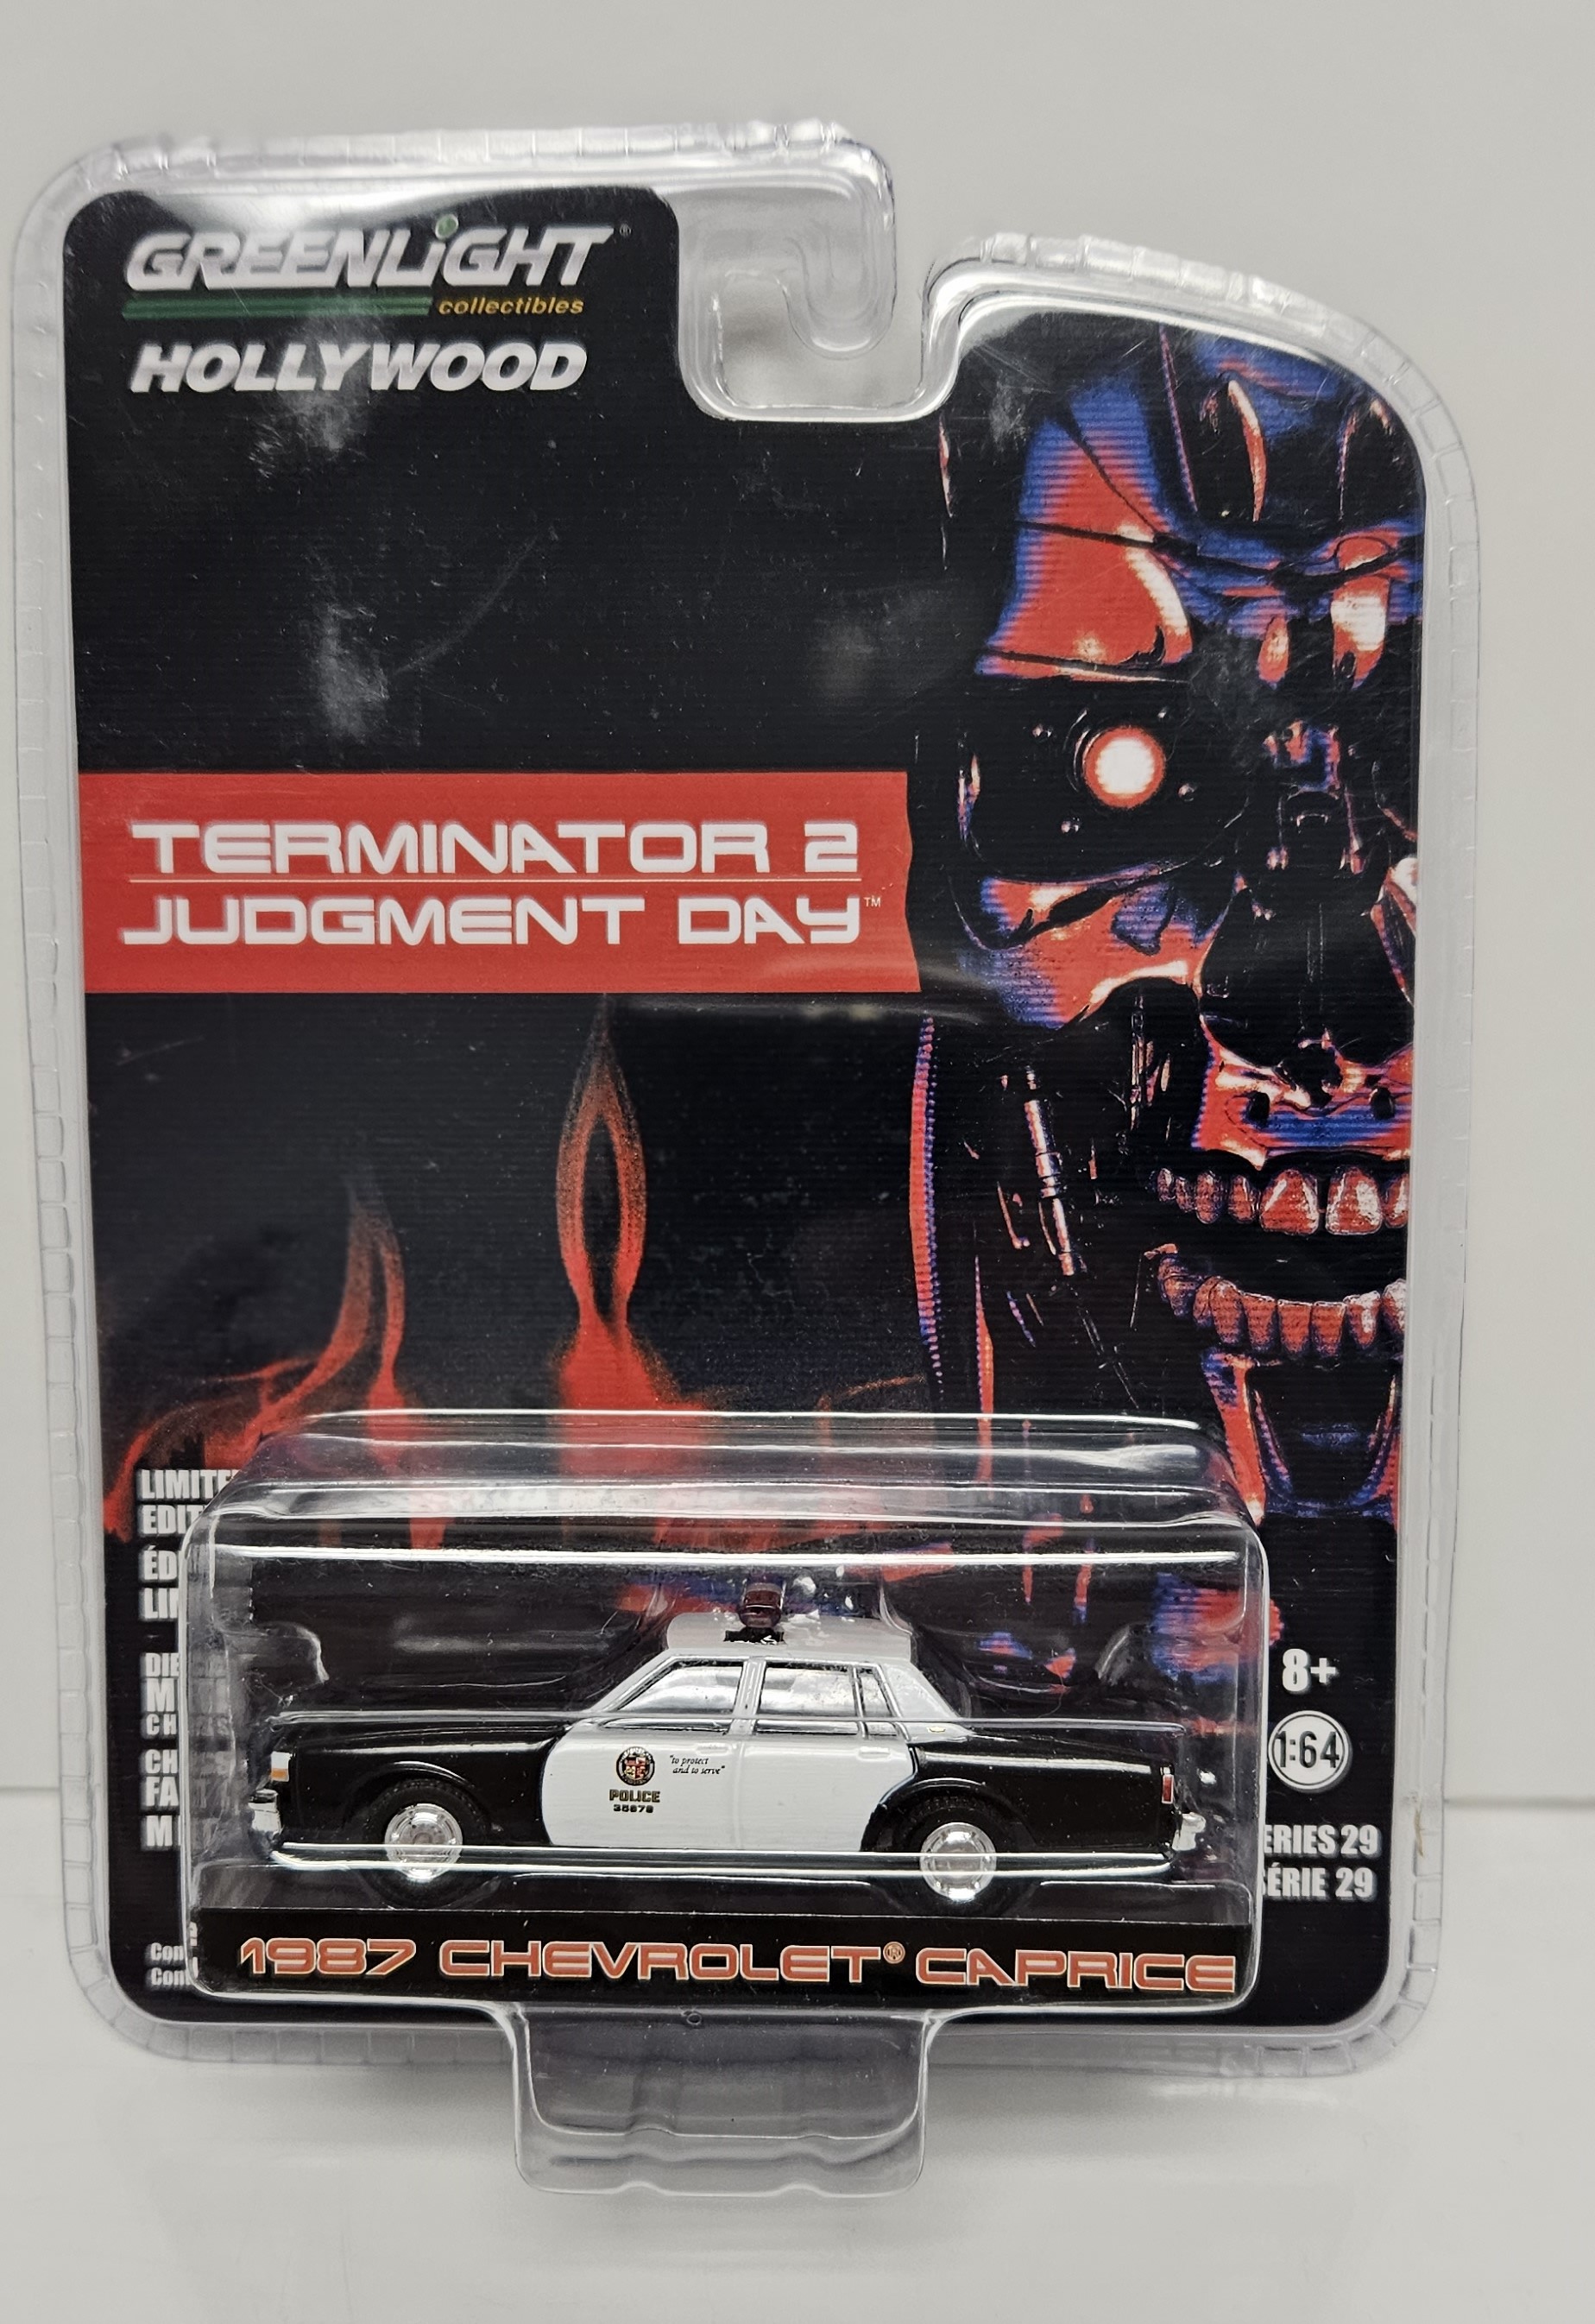 1987 Chevy Caprice - Terminator 2 Judgment Day - Hollywood Series 29 1: ...